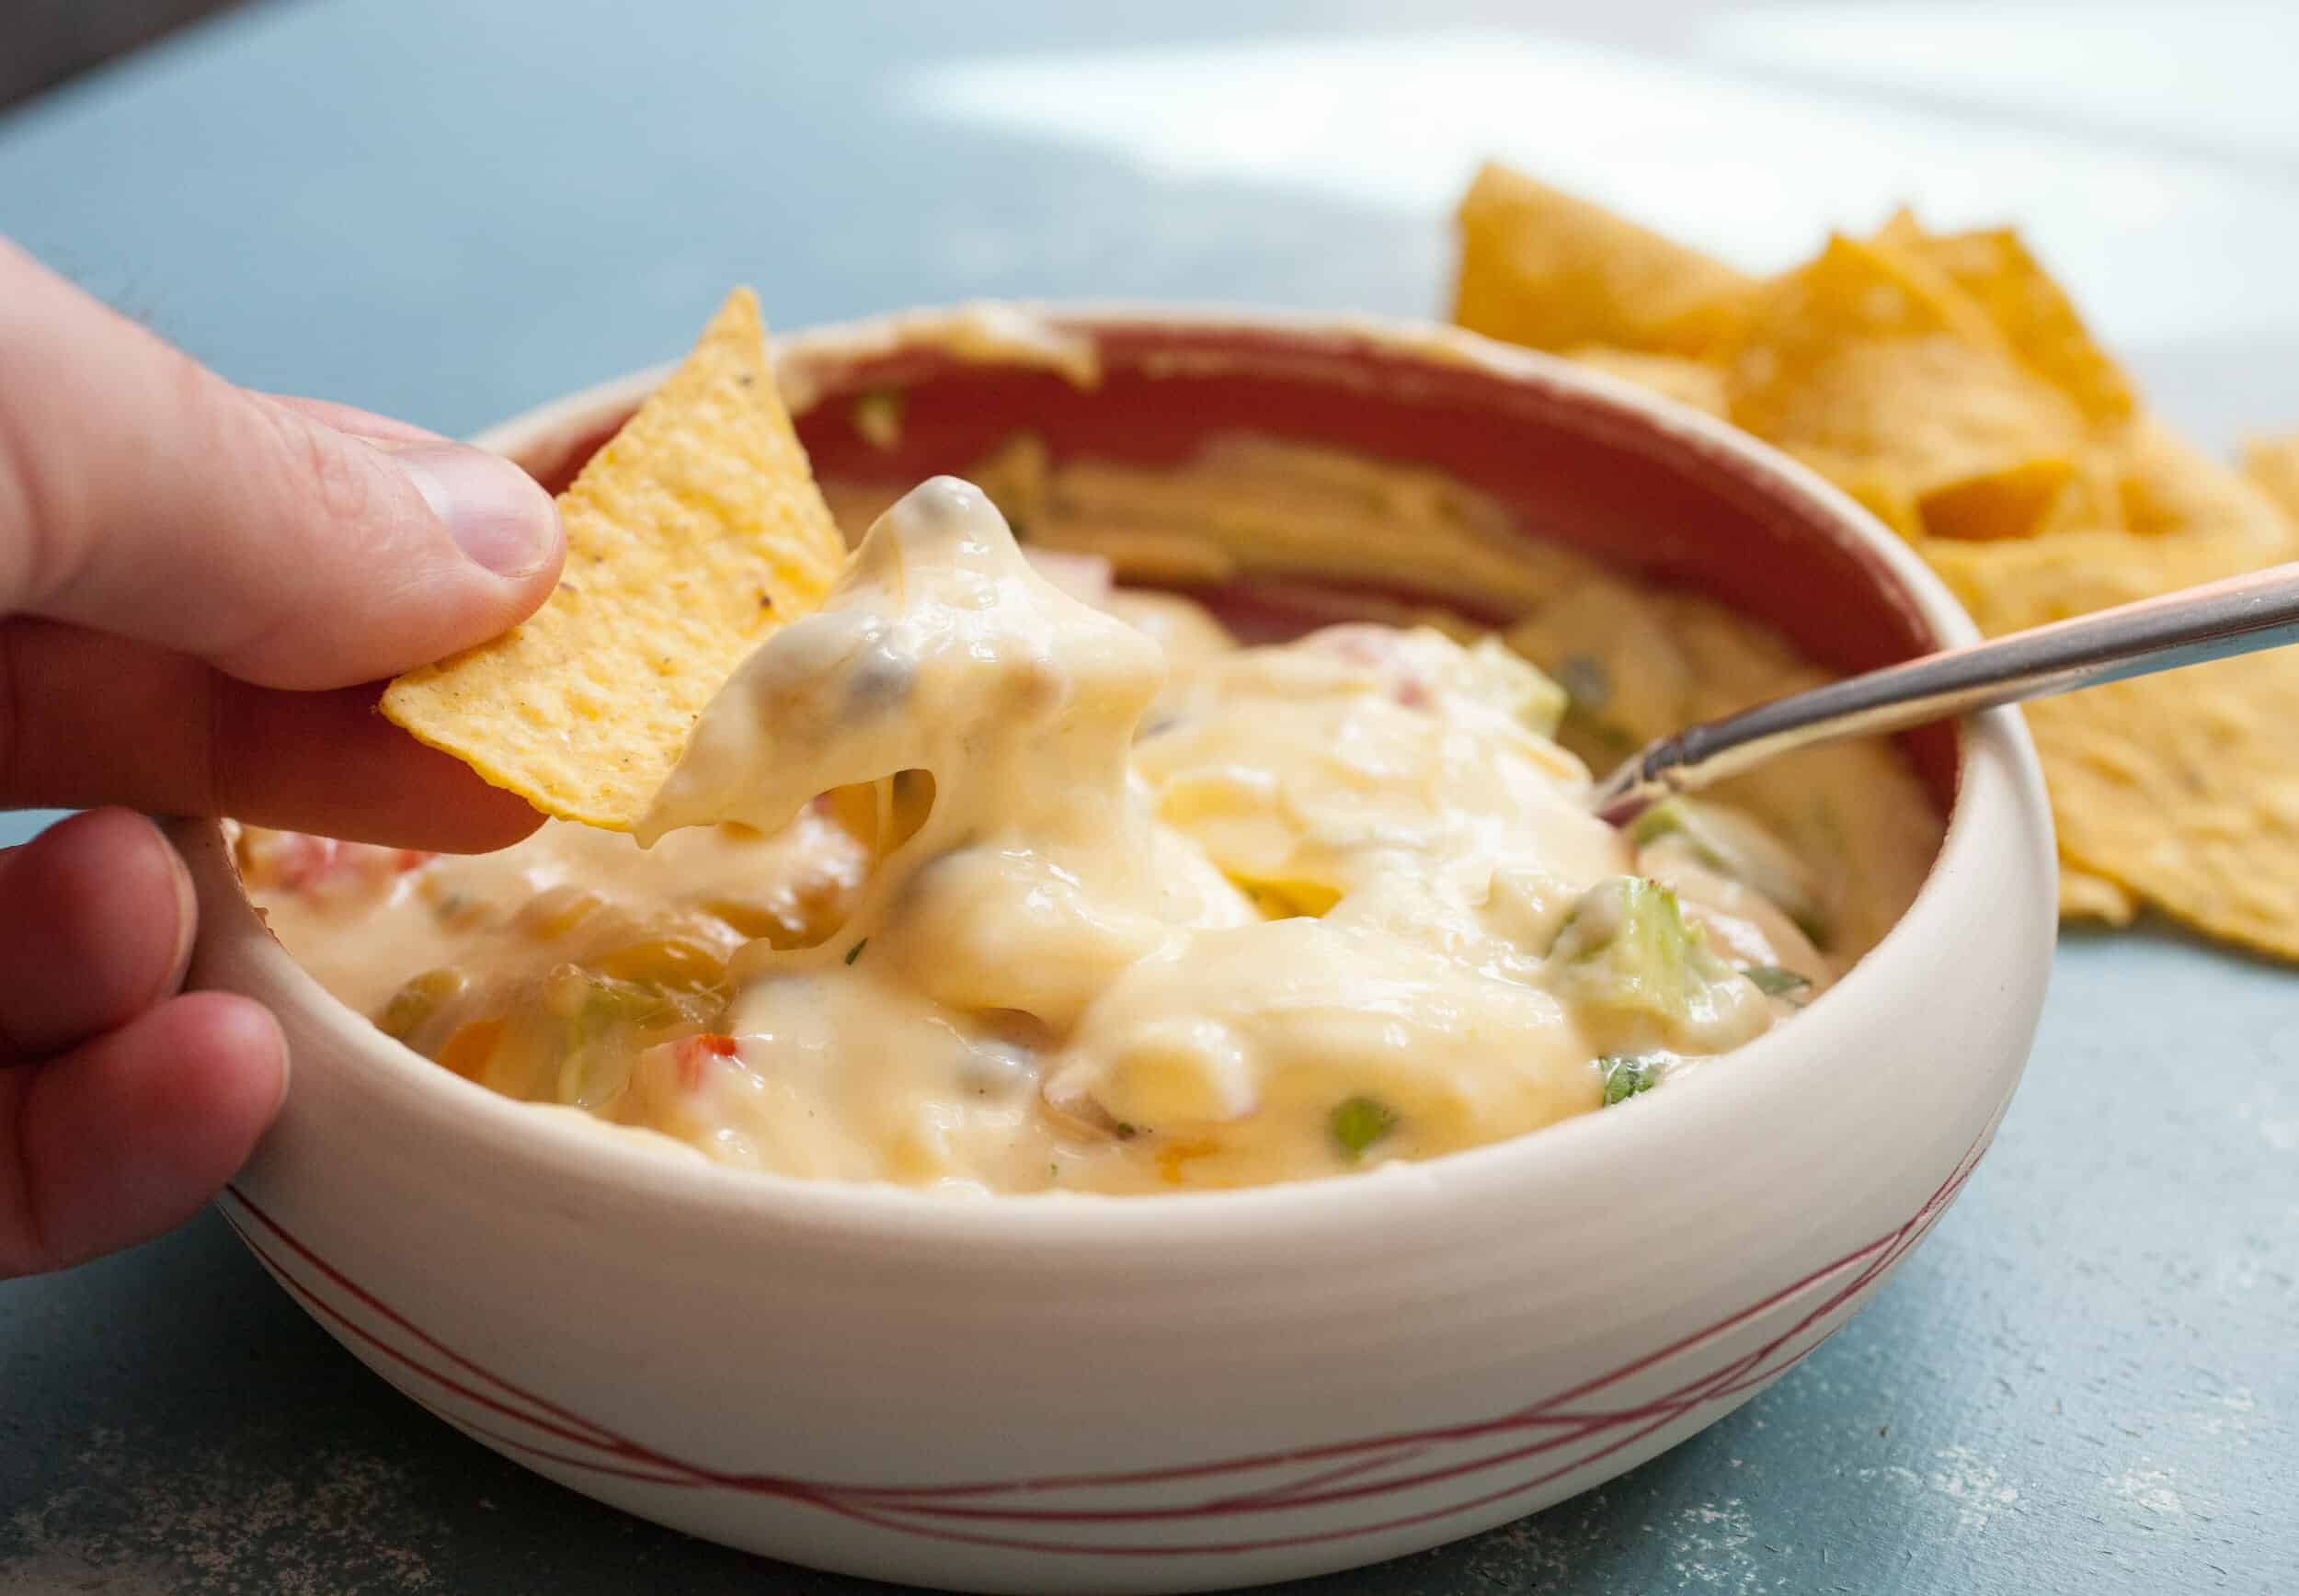 Macheesmo Mud Queso: This queso is jam-packed with add-ins and when you stir it all together you end up with 